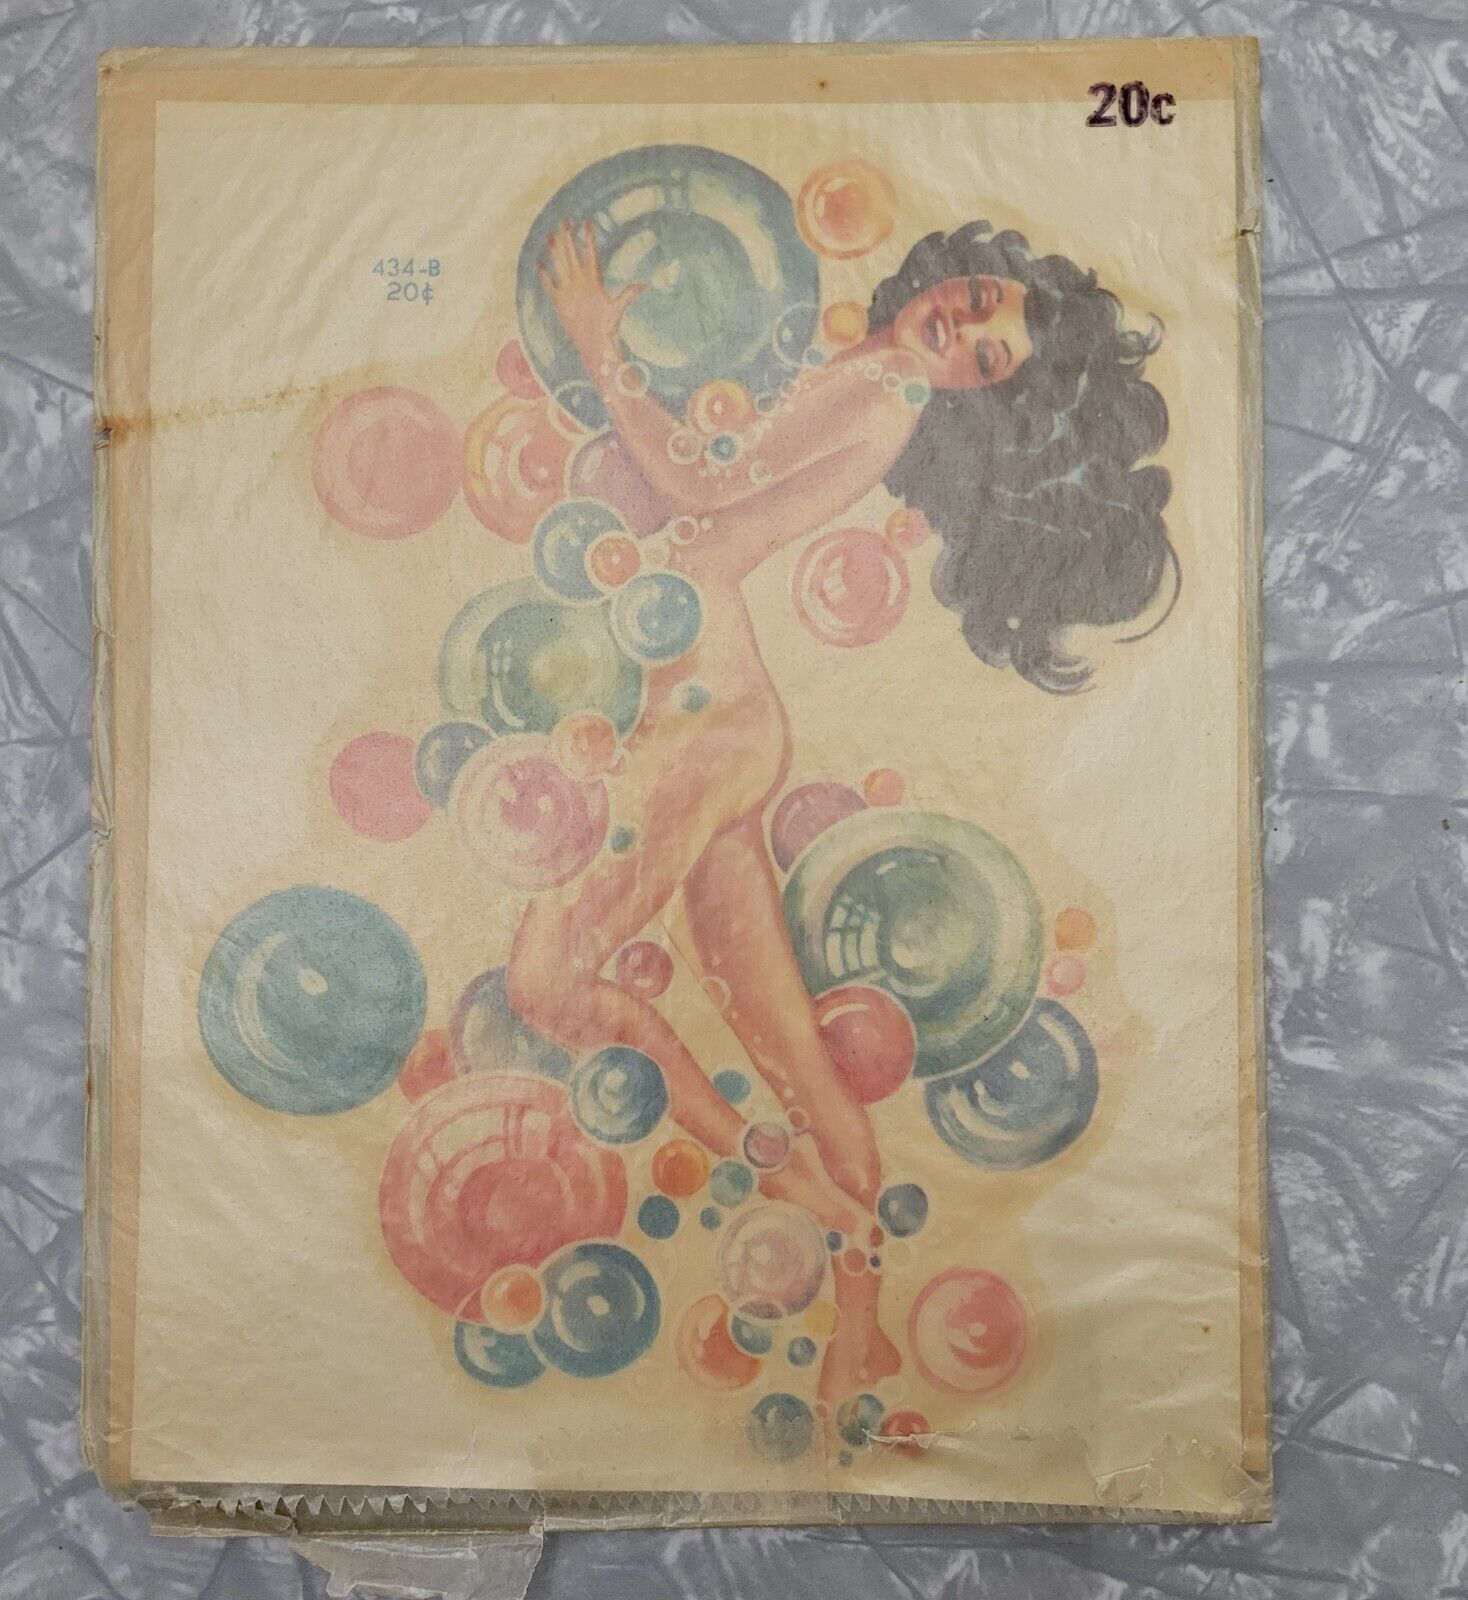 Vintage Meyercord #434-B Beauty Spot Pinup Bubble Girl Decal ~ 7.5